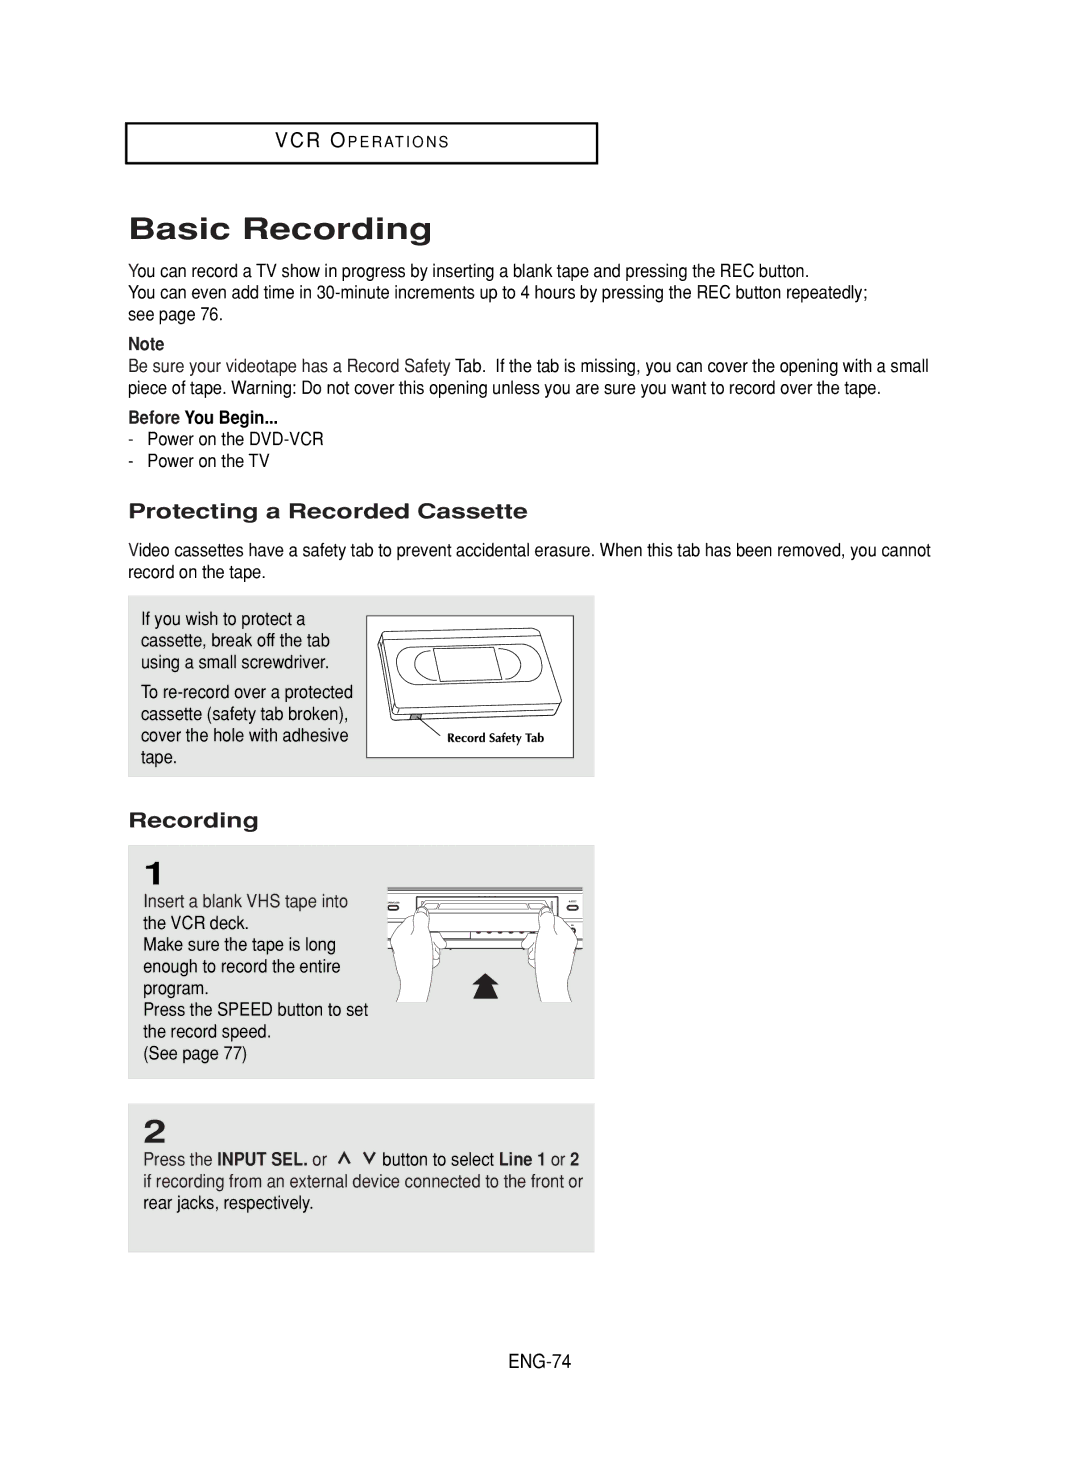 Samsung DVD-V9800 instruction manual Basic Recording, Protecting a Recorded Cassette, ENG-74, Before You Begin 